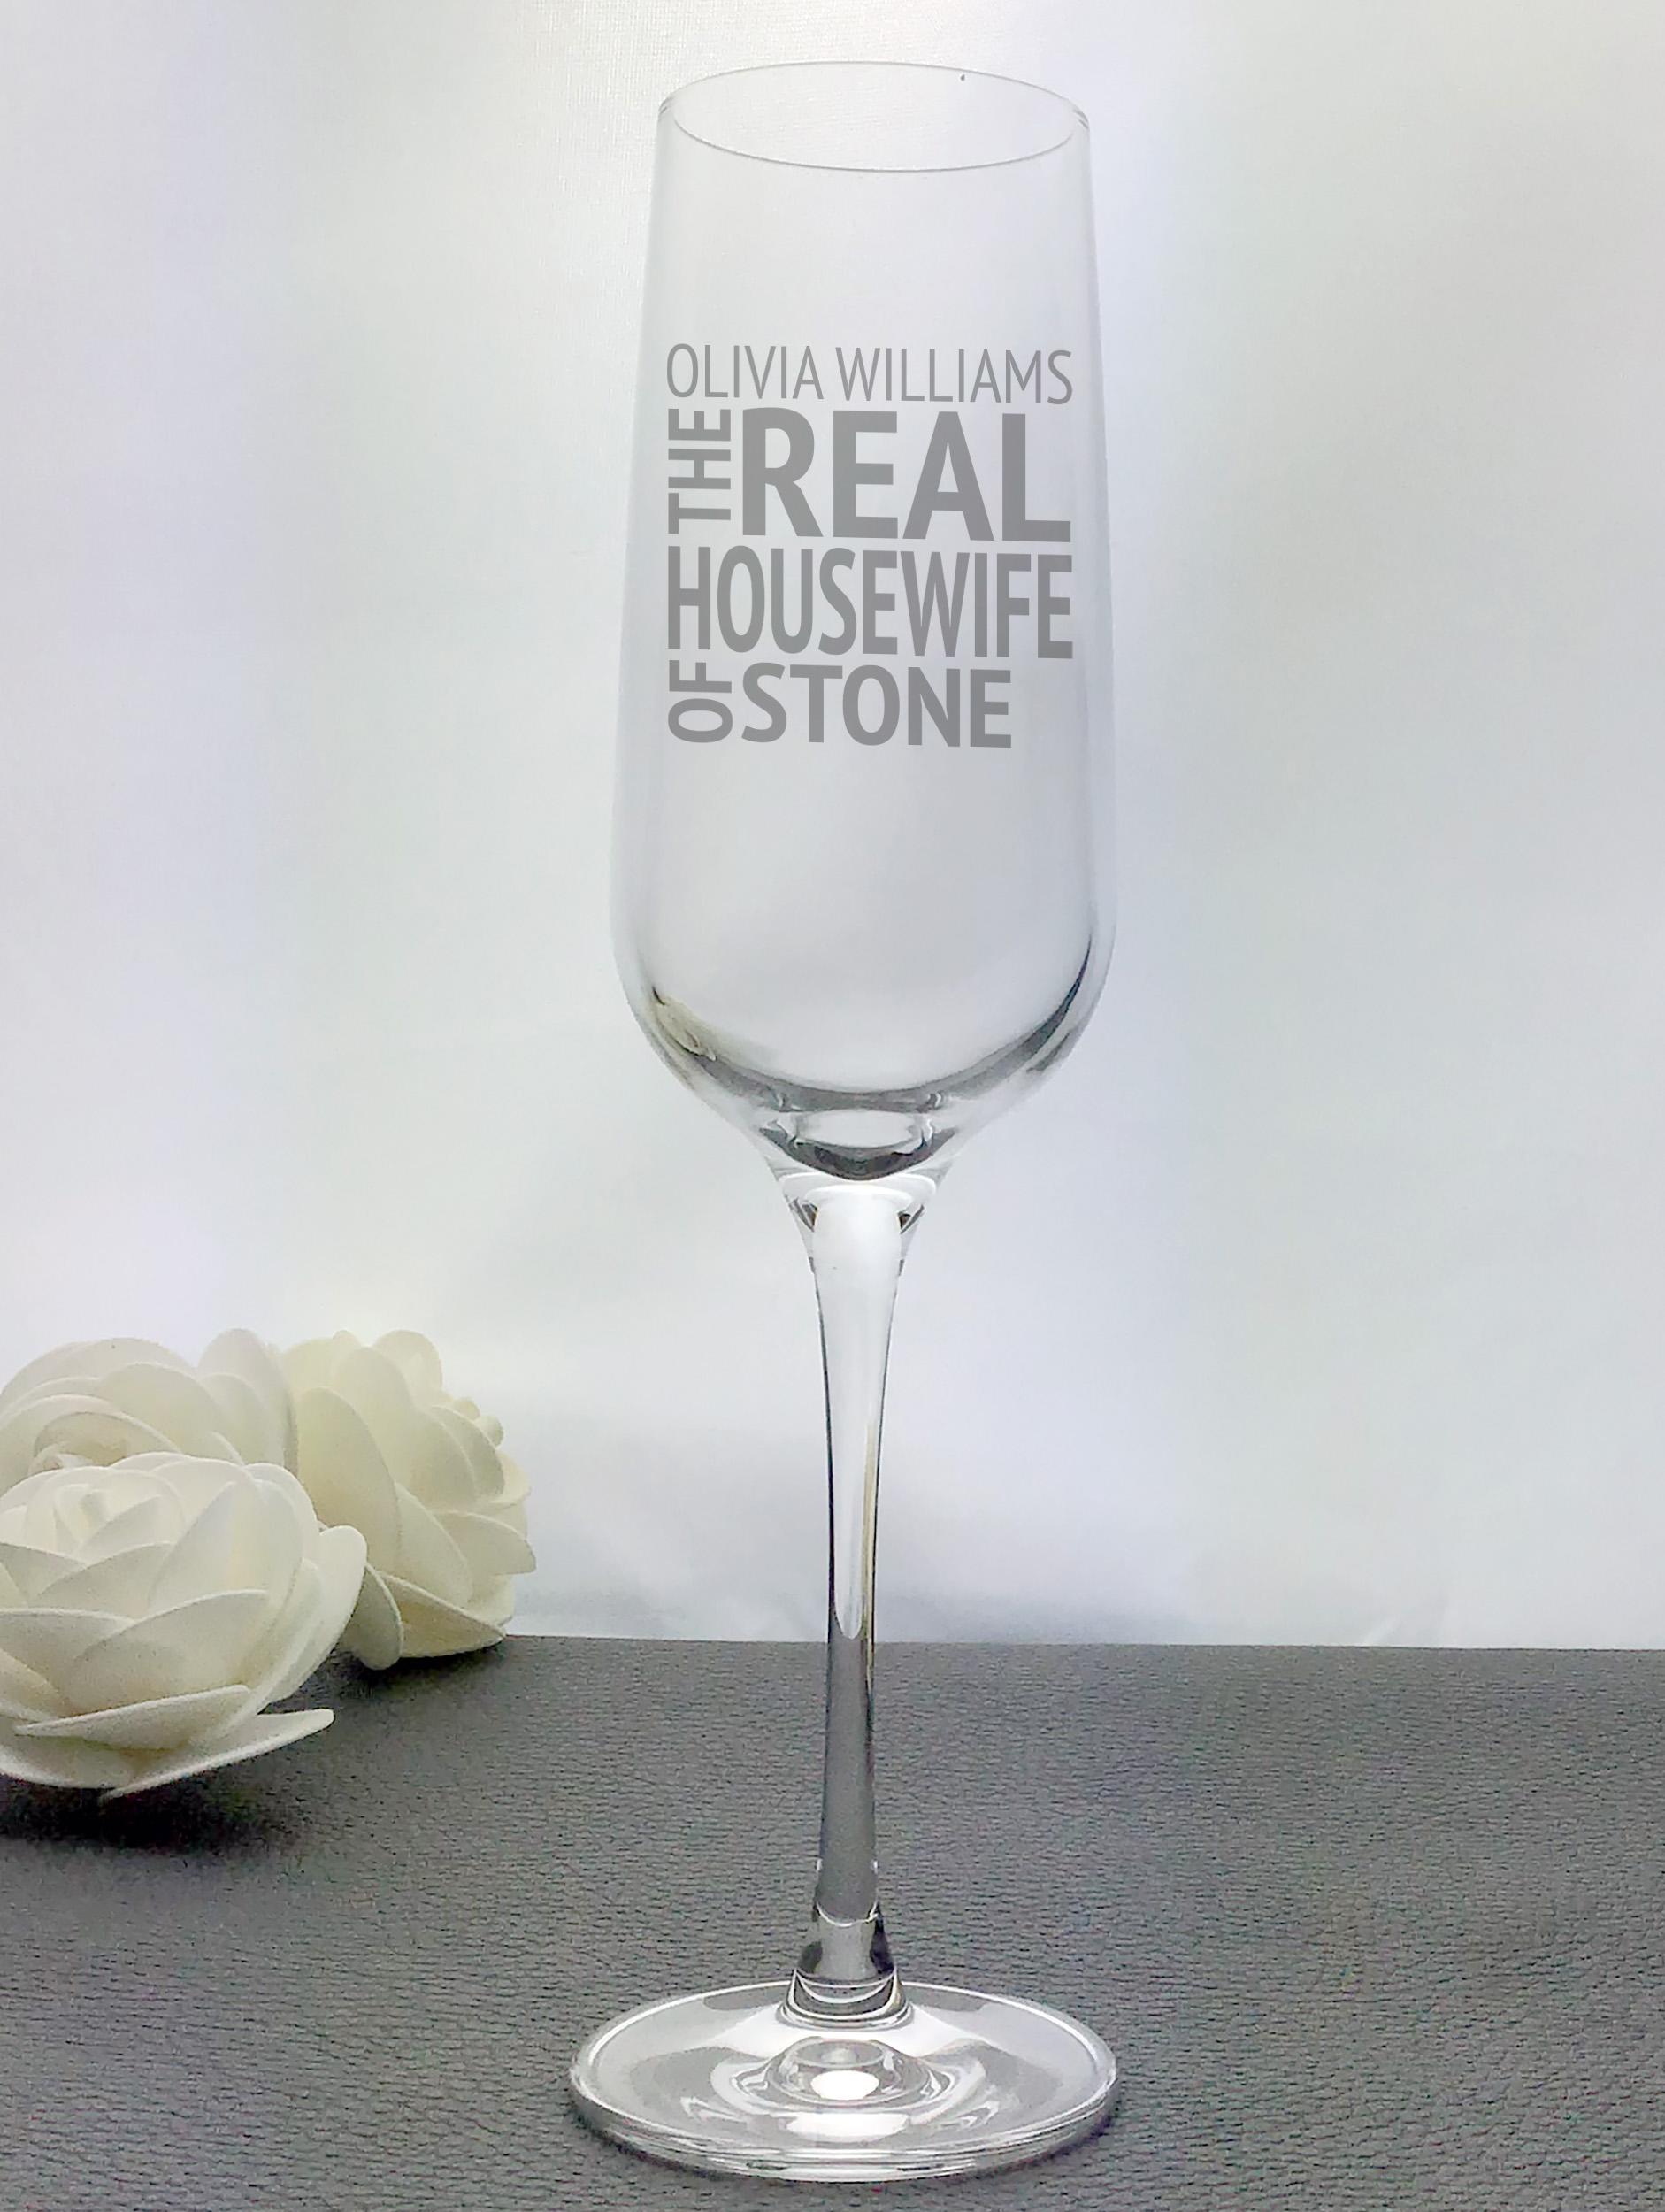 real champagne glasses